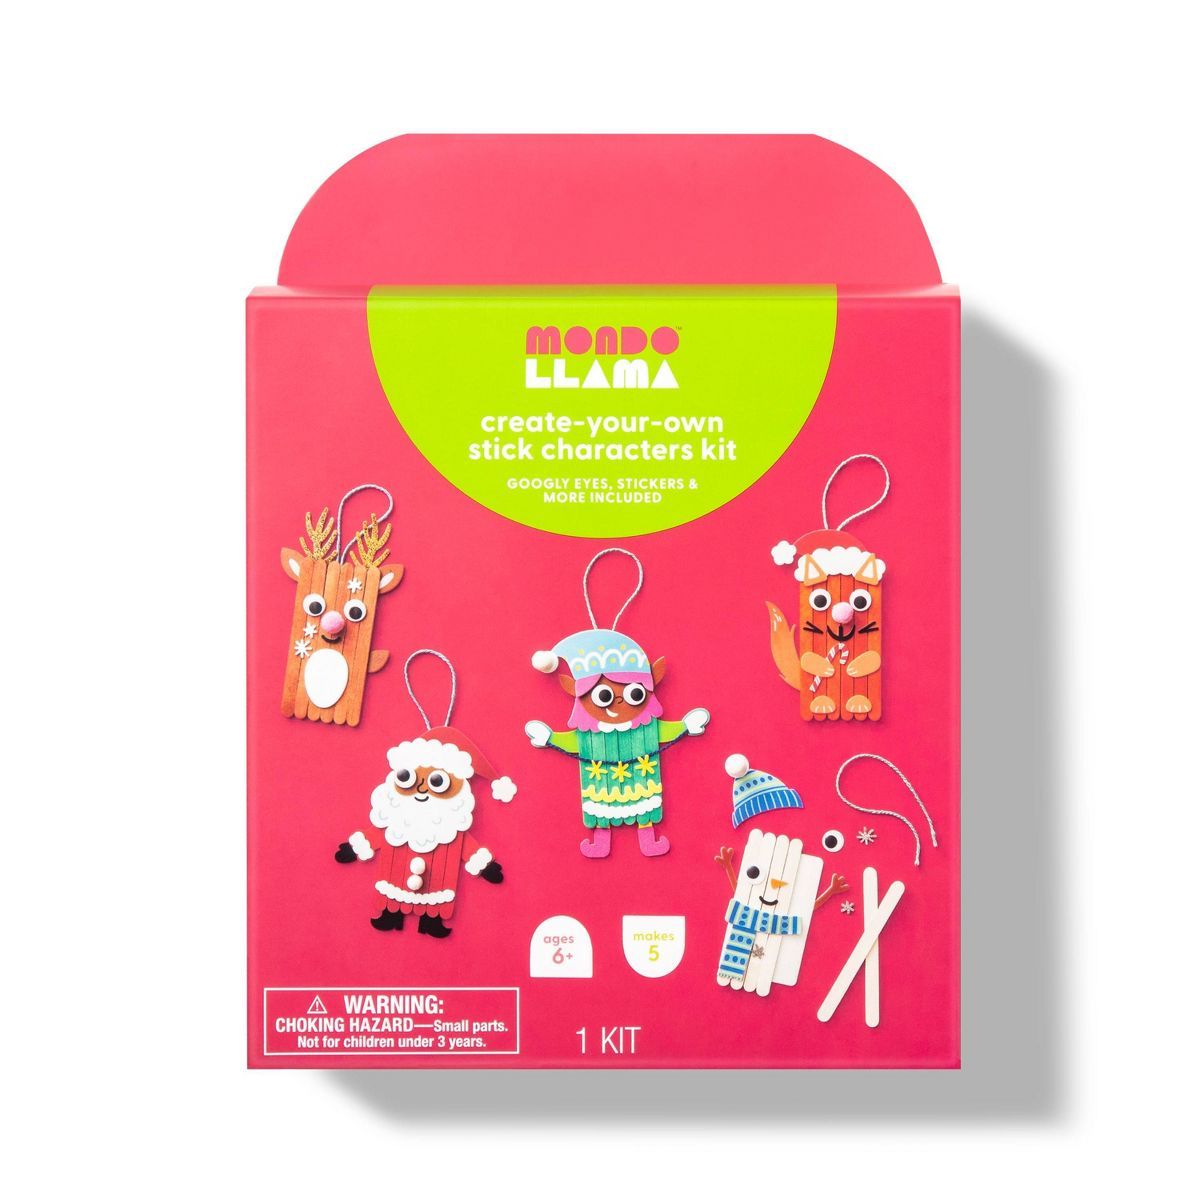 Create-Your-Own Craft Stick Characters Christmas Kit - Mondo Llama™ | Target